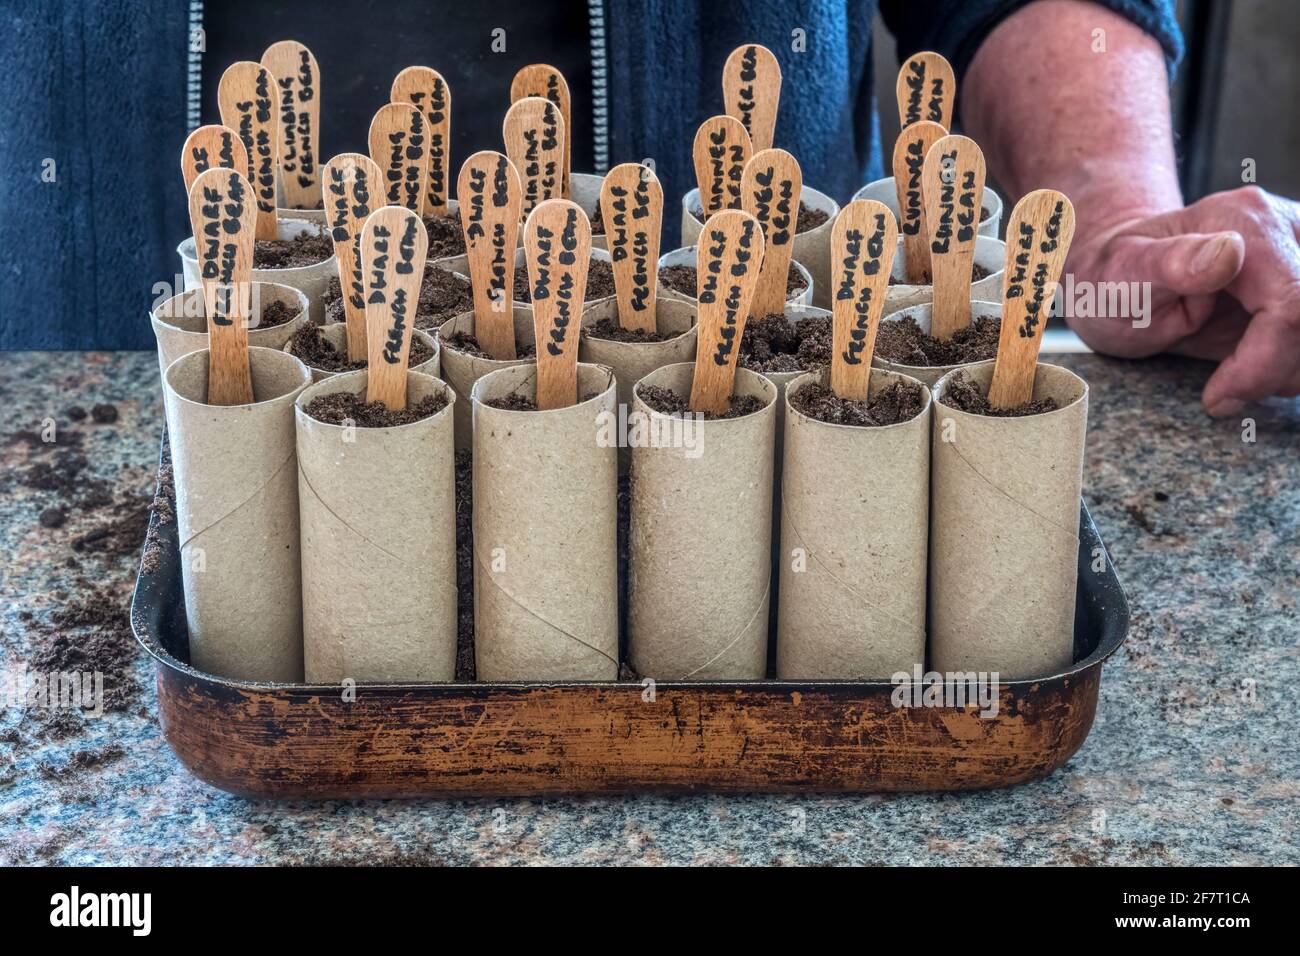 French beans planted in old toilet rolls filled with potting compost & held in a re-used baking tray with lollipop sticks as labels. Stock Photo